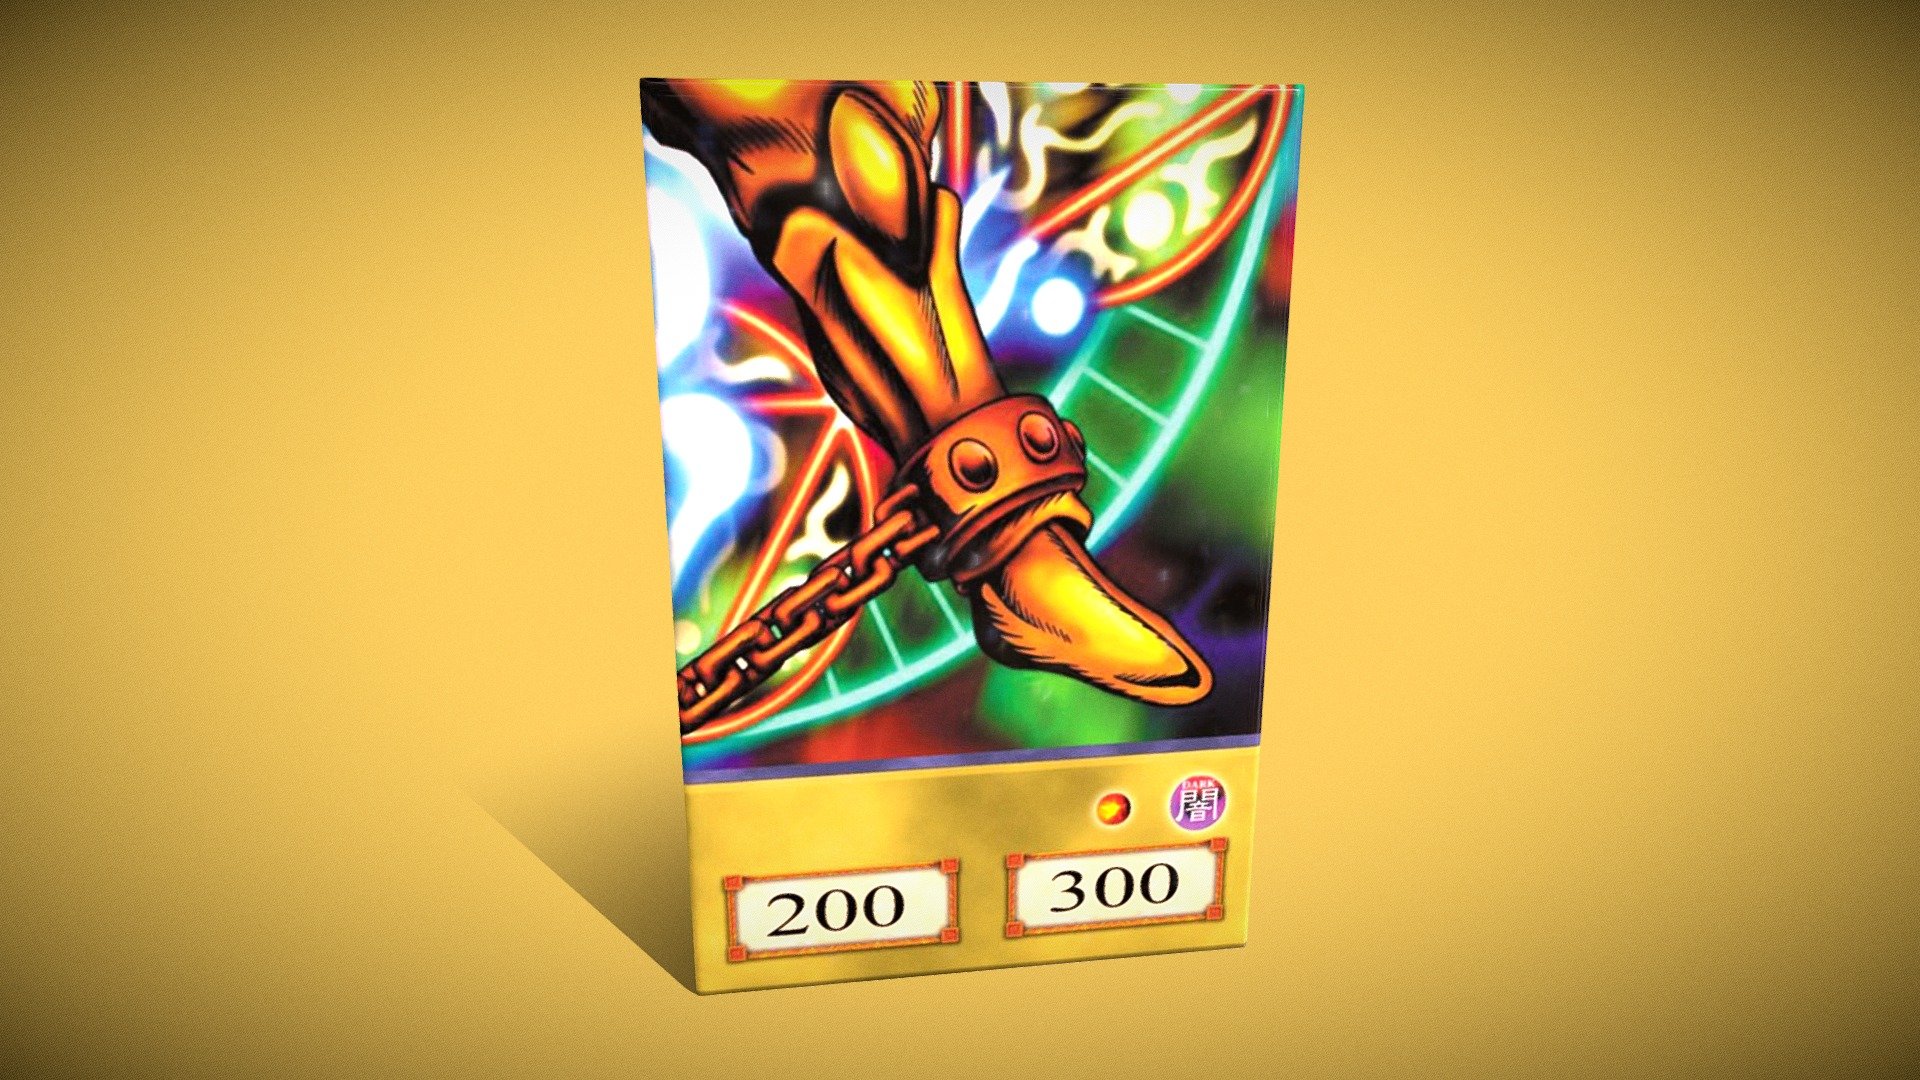 The Left Leg of the Forbidden One is a pivotal component in the legendary Exodia set within the Yu-Gi-Oh! trading card game. As one of the five cards required to summon Exodia the Forbidden One and clinch an instant victory, the Left Leg holds significant strategic importance. Alongside the other pieces (Right Leg, Right Arm, Left Arm, and Exodia's Head), it forms an unstoppable combination, creating a sense of anticipation and power in gameplay. Collectors and players value the Left Leg for its distinctive design and its role in the iconic Exodia strategy, making it a sought-after and prized card in the Yu-Gi-Oh! universe 3d model